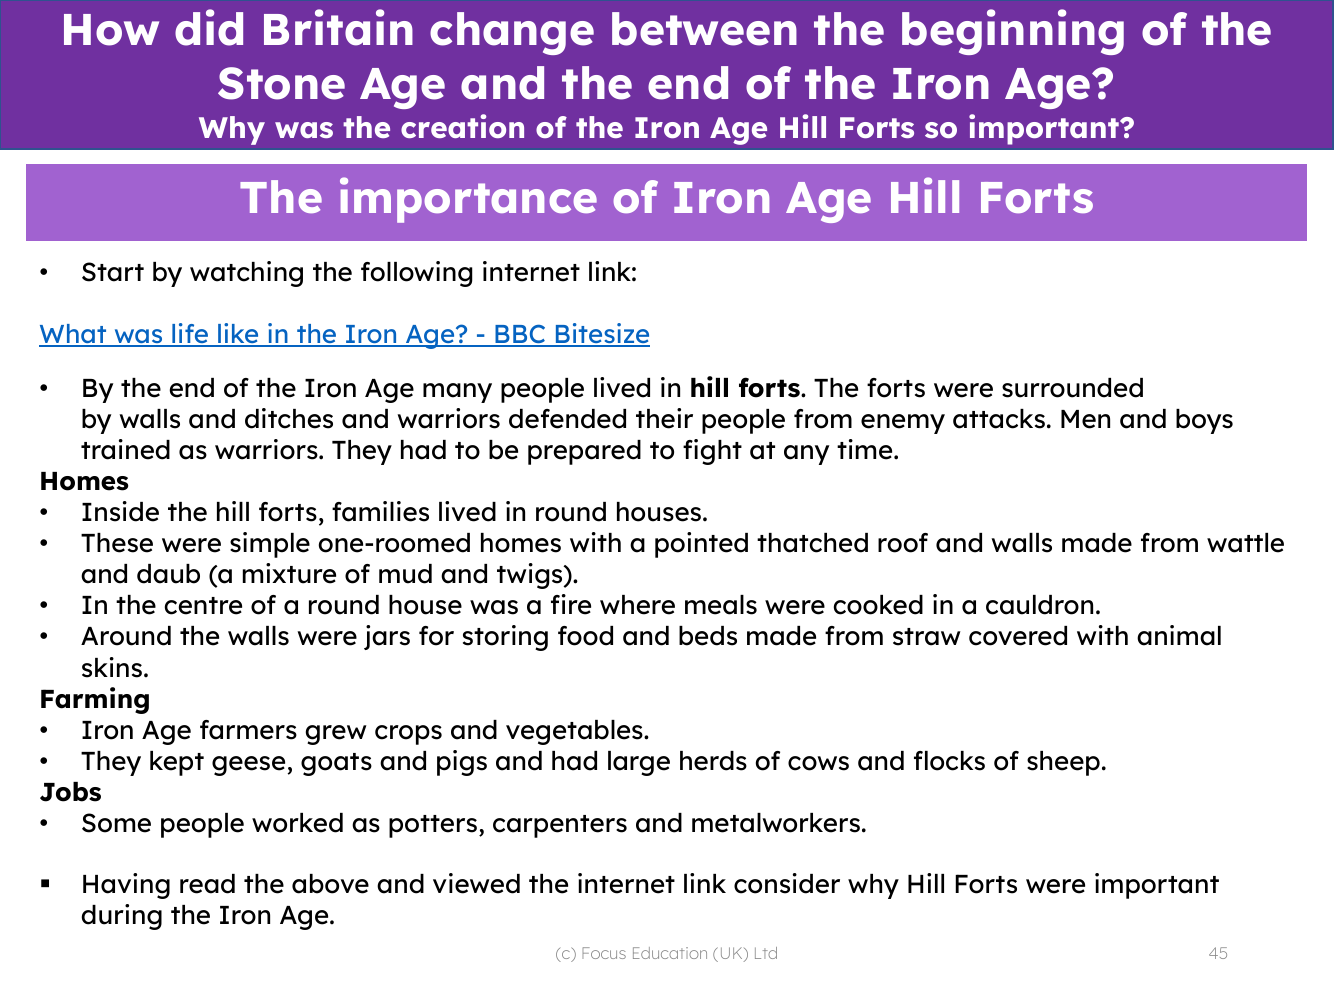 The importance of Iron Age hill forts